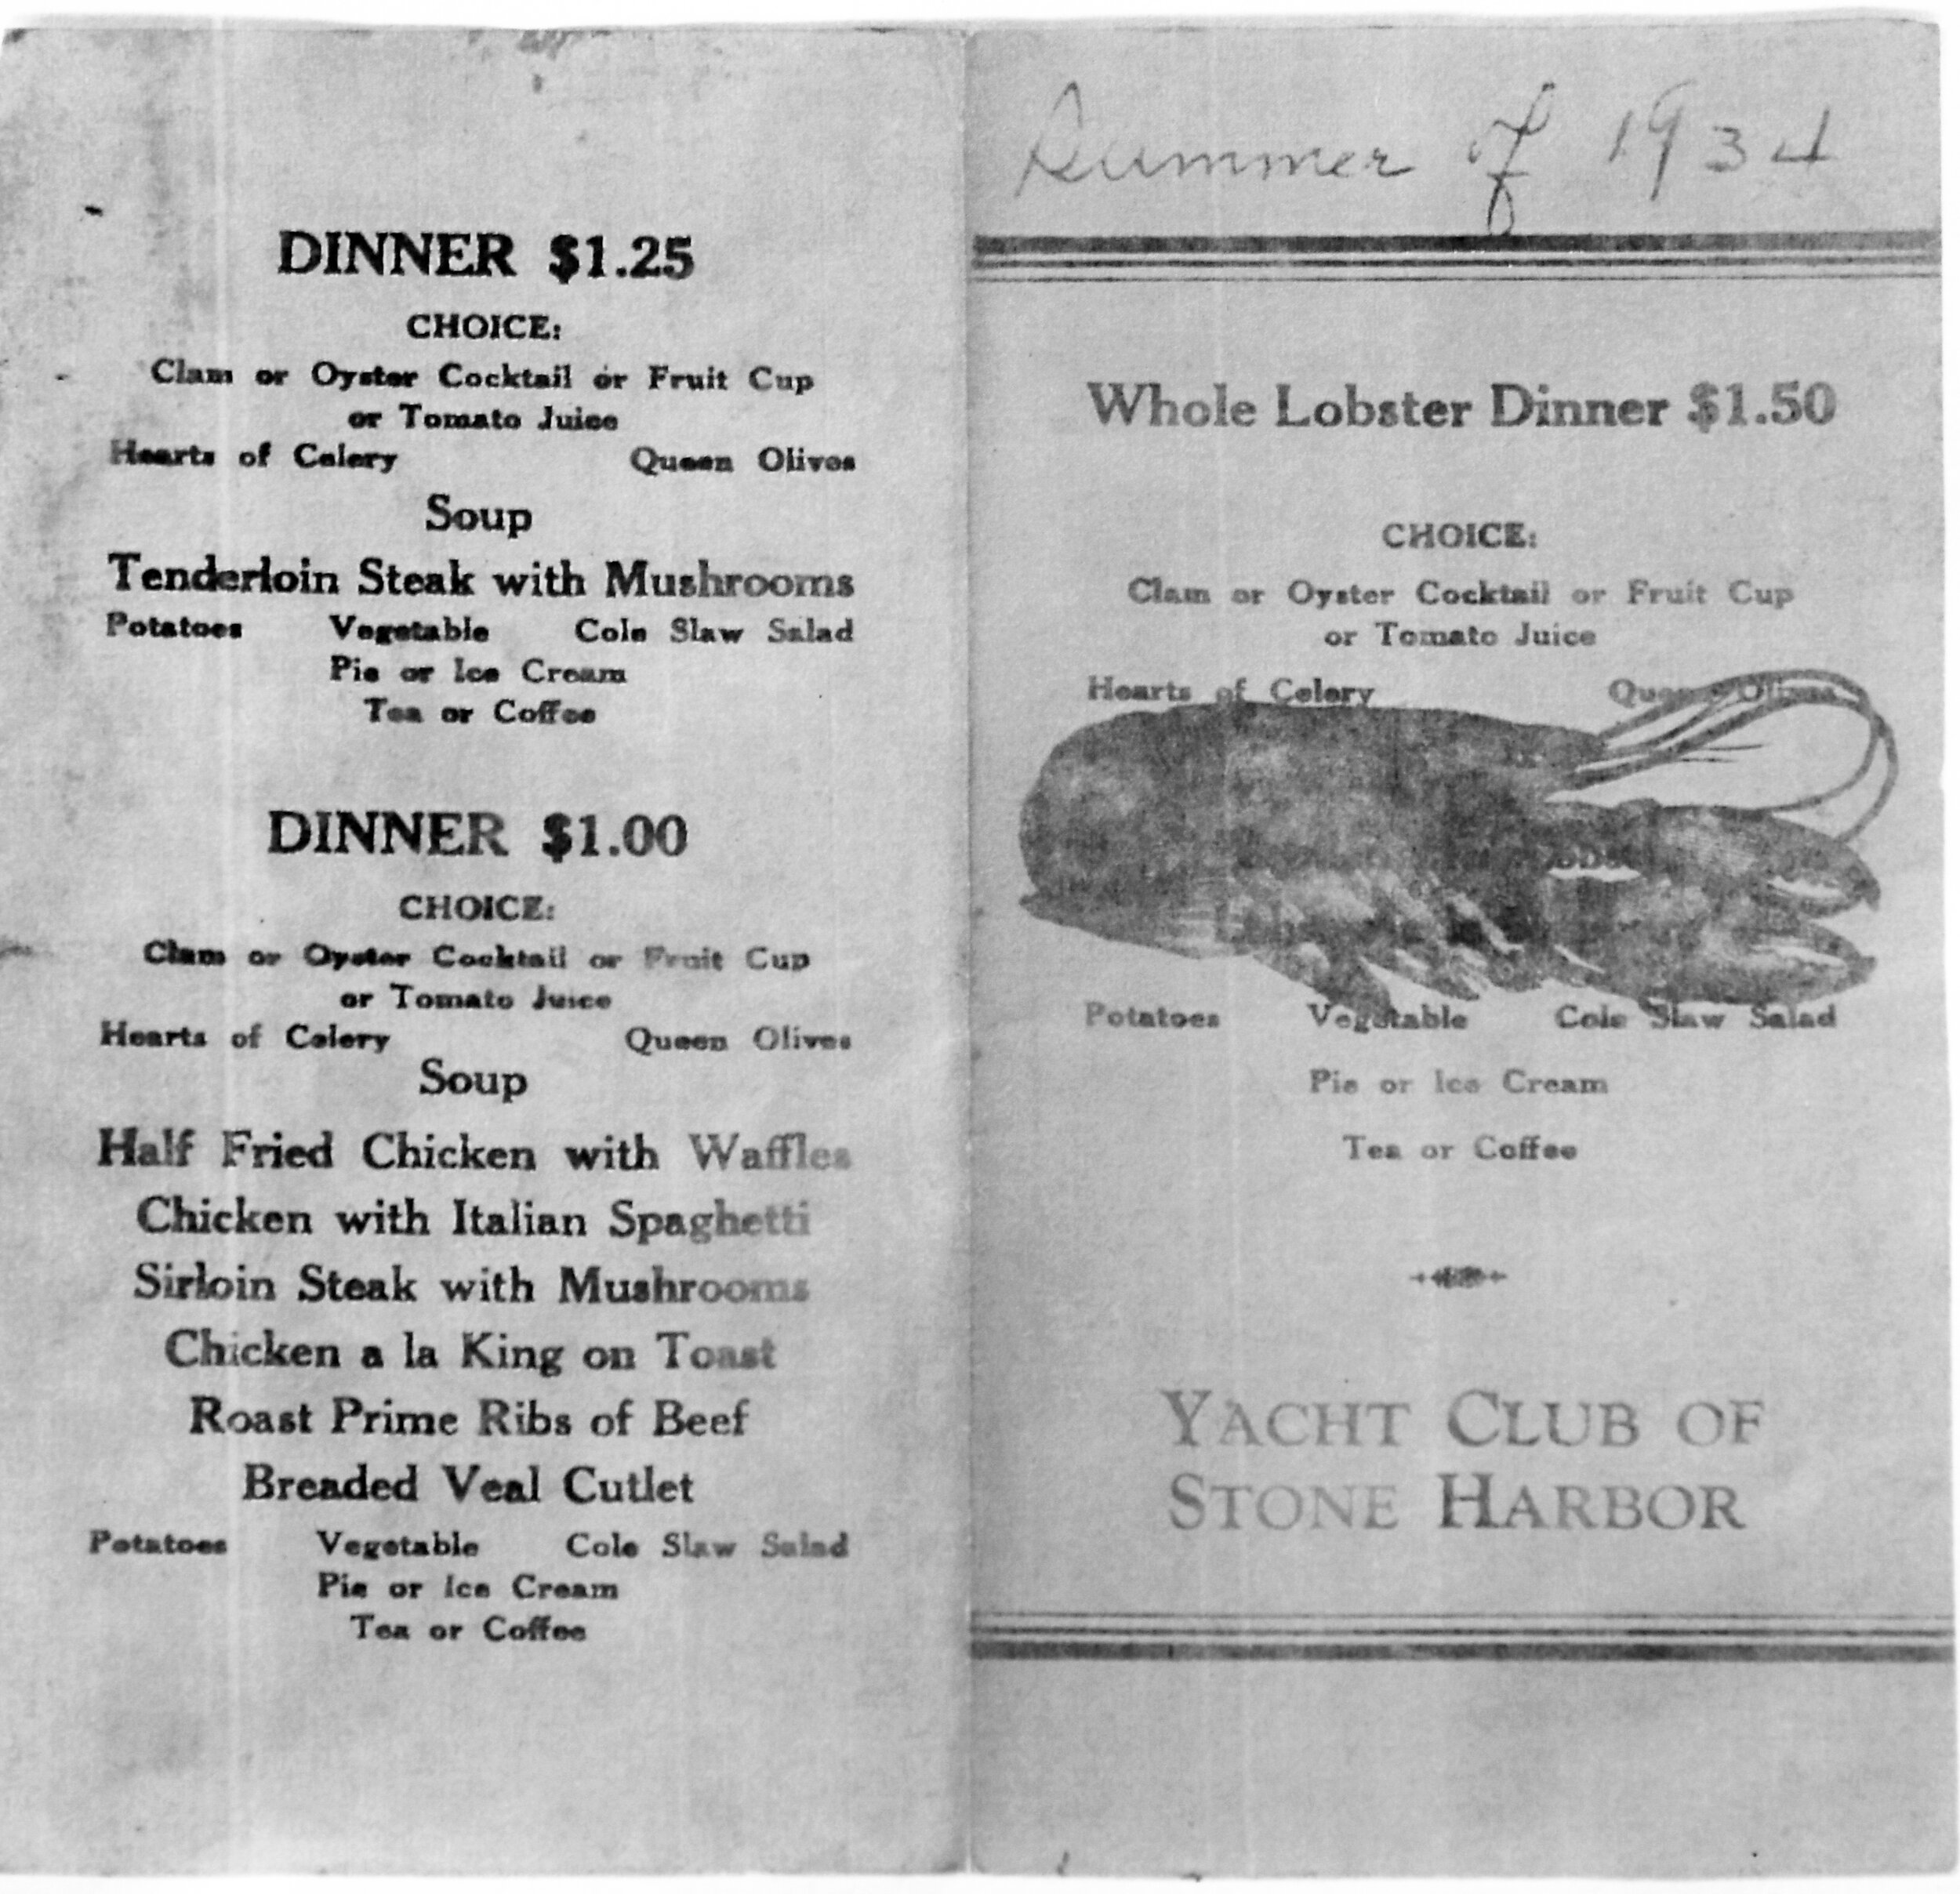 Menu from the summer of 1934.